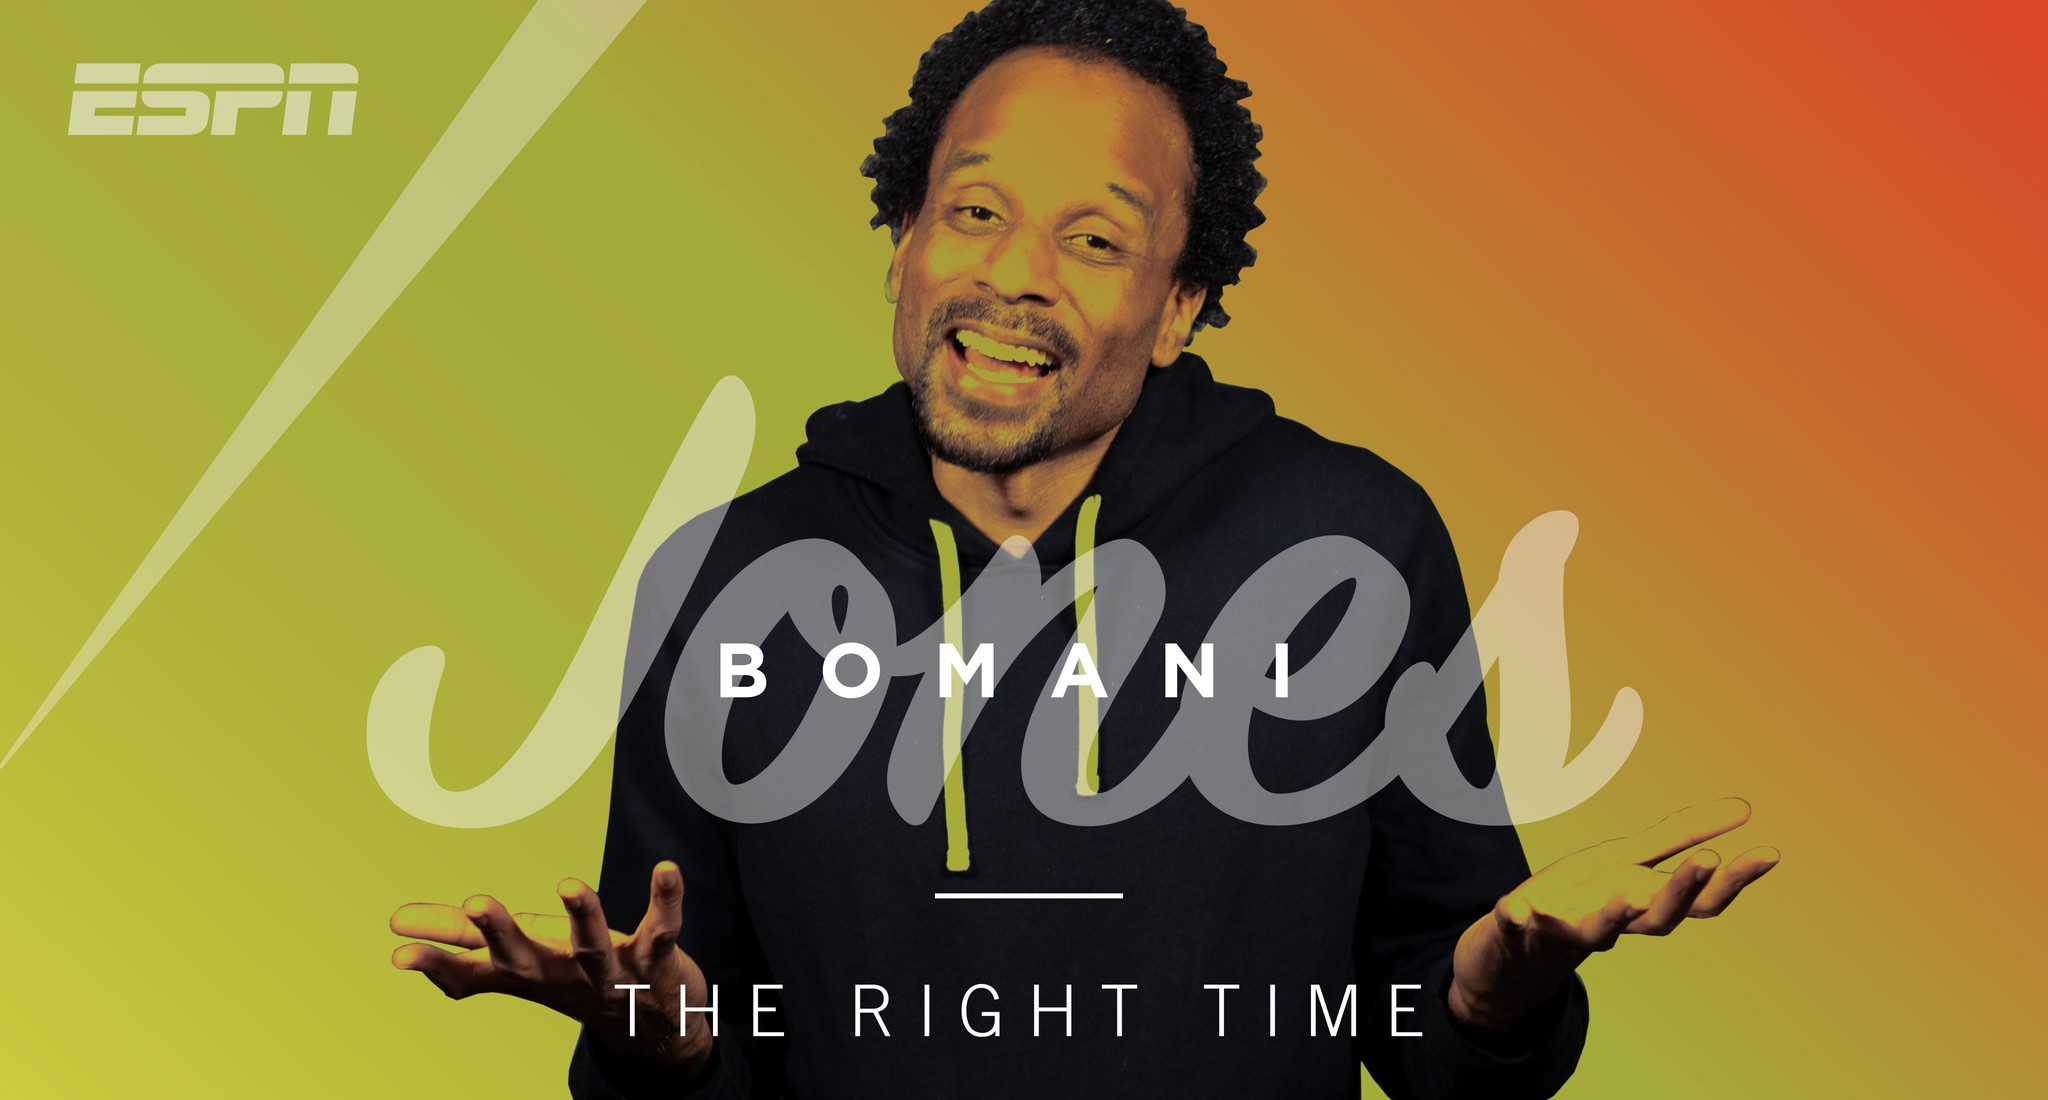 A graphic for the "The Right Time with Bomani Jones" podcast.